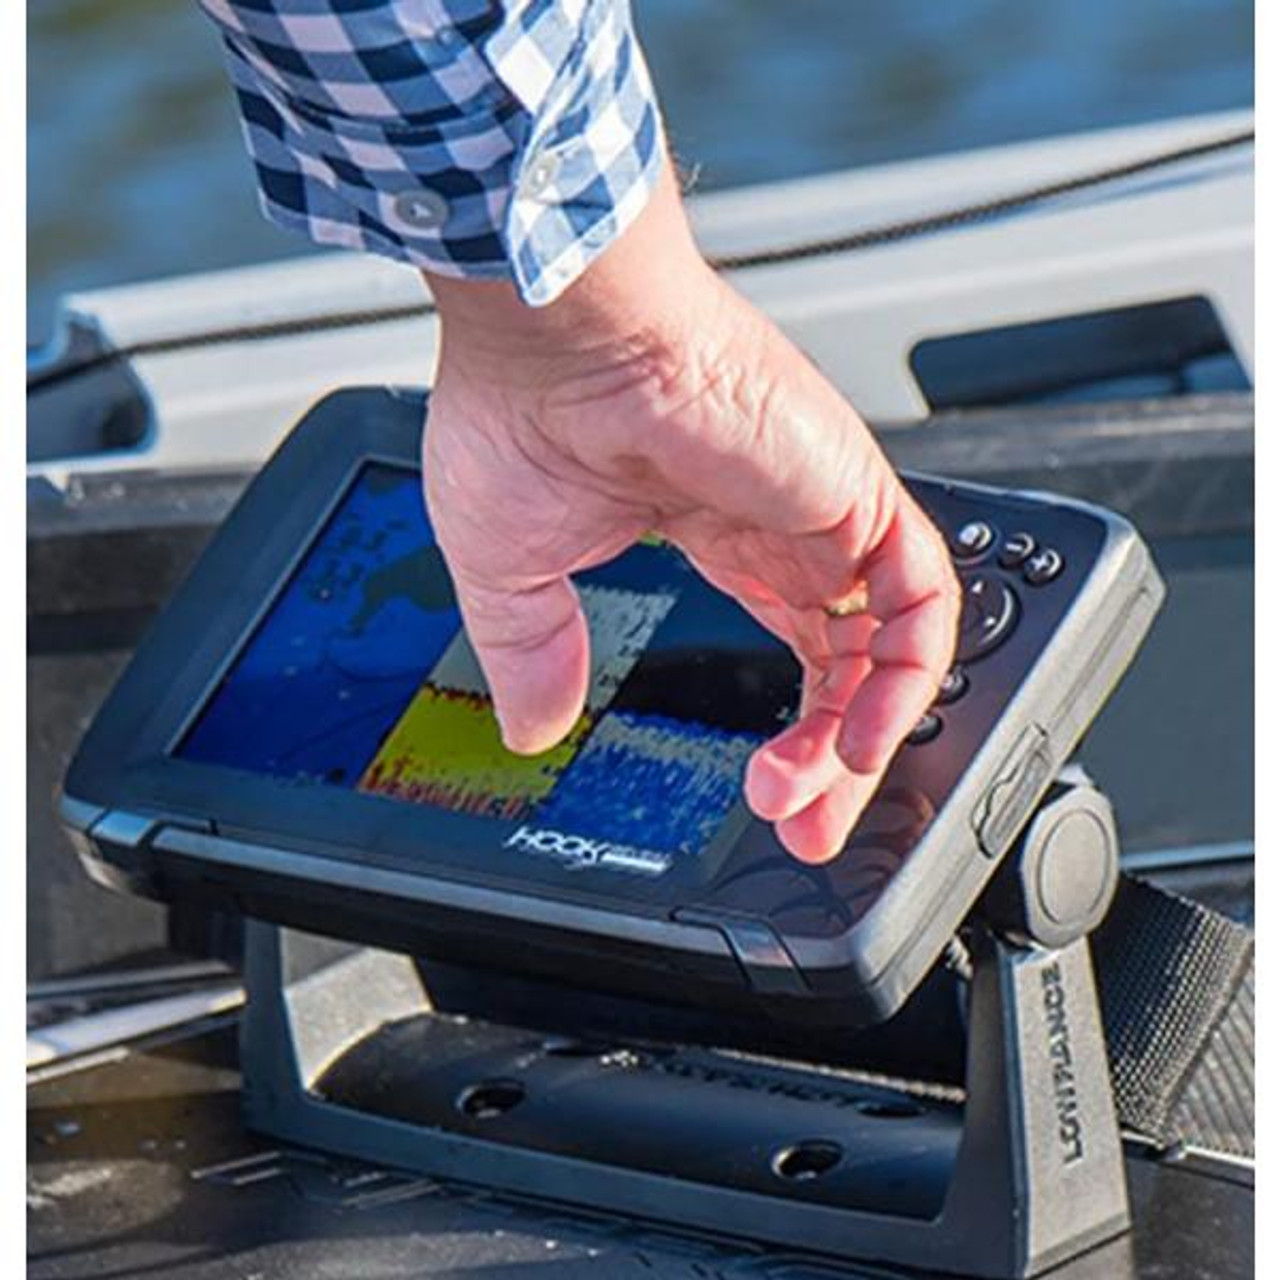 Lowrance HOOK Reveal 7x TripleShot with CHIRP, SideScan, DownScan